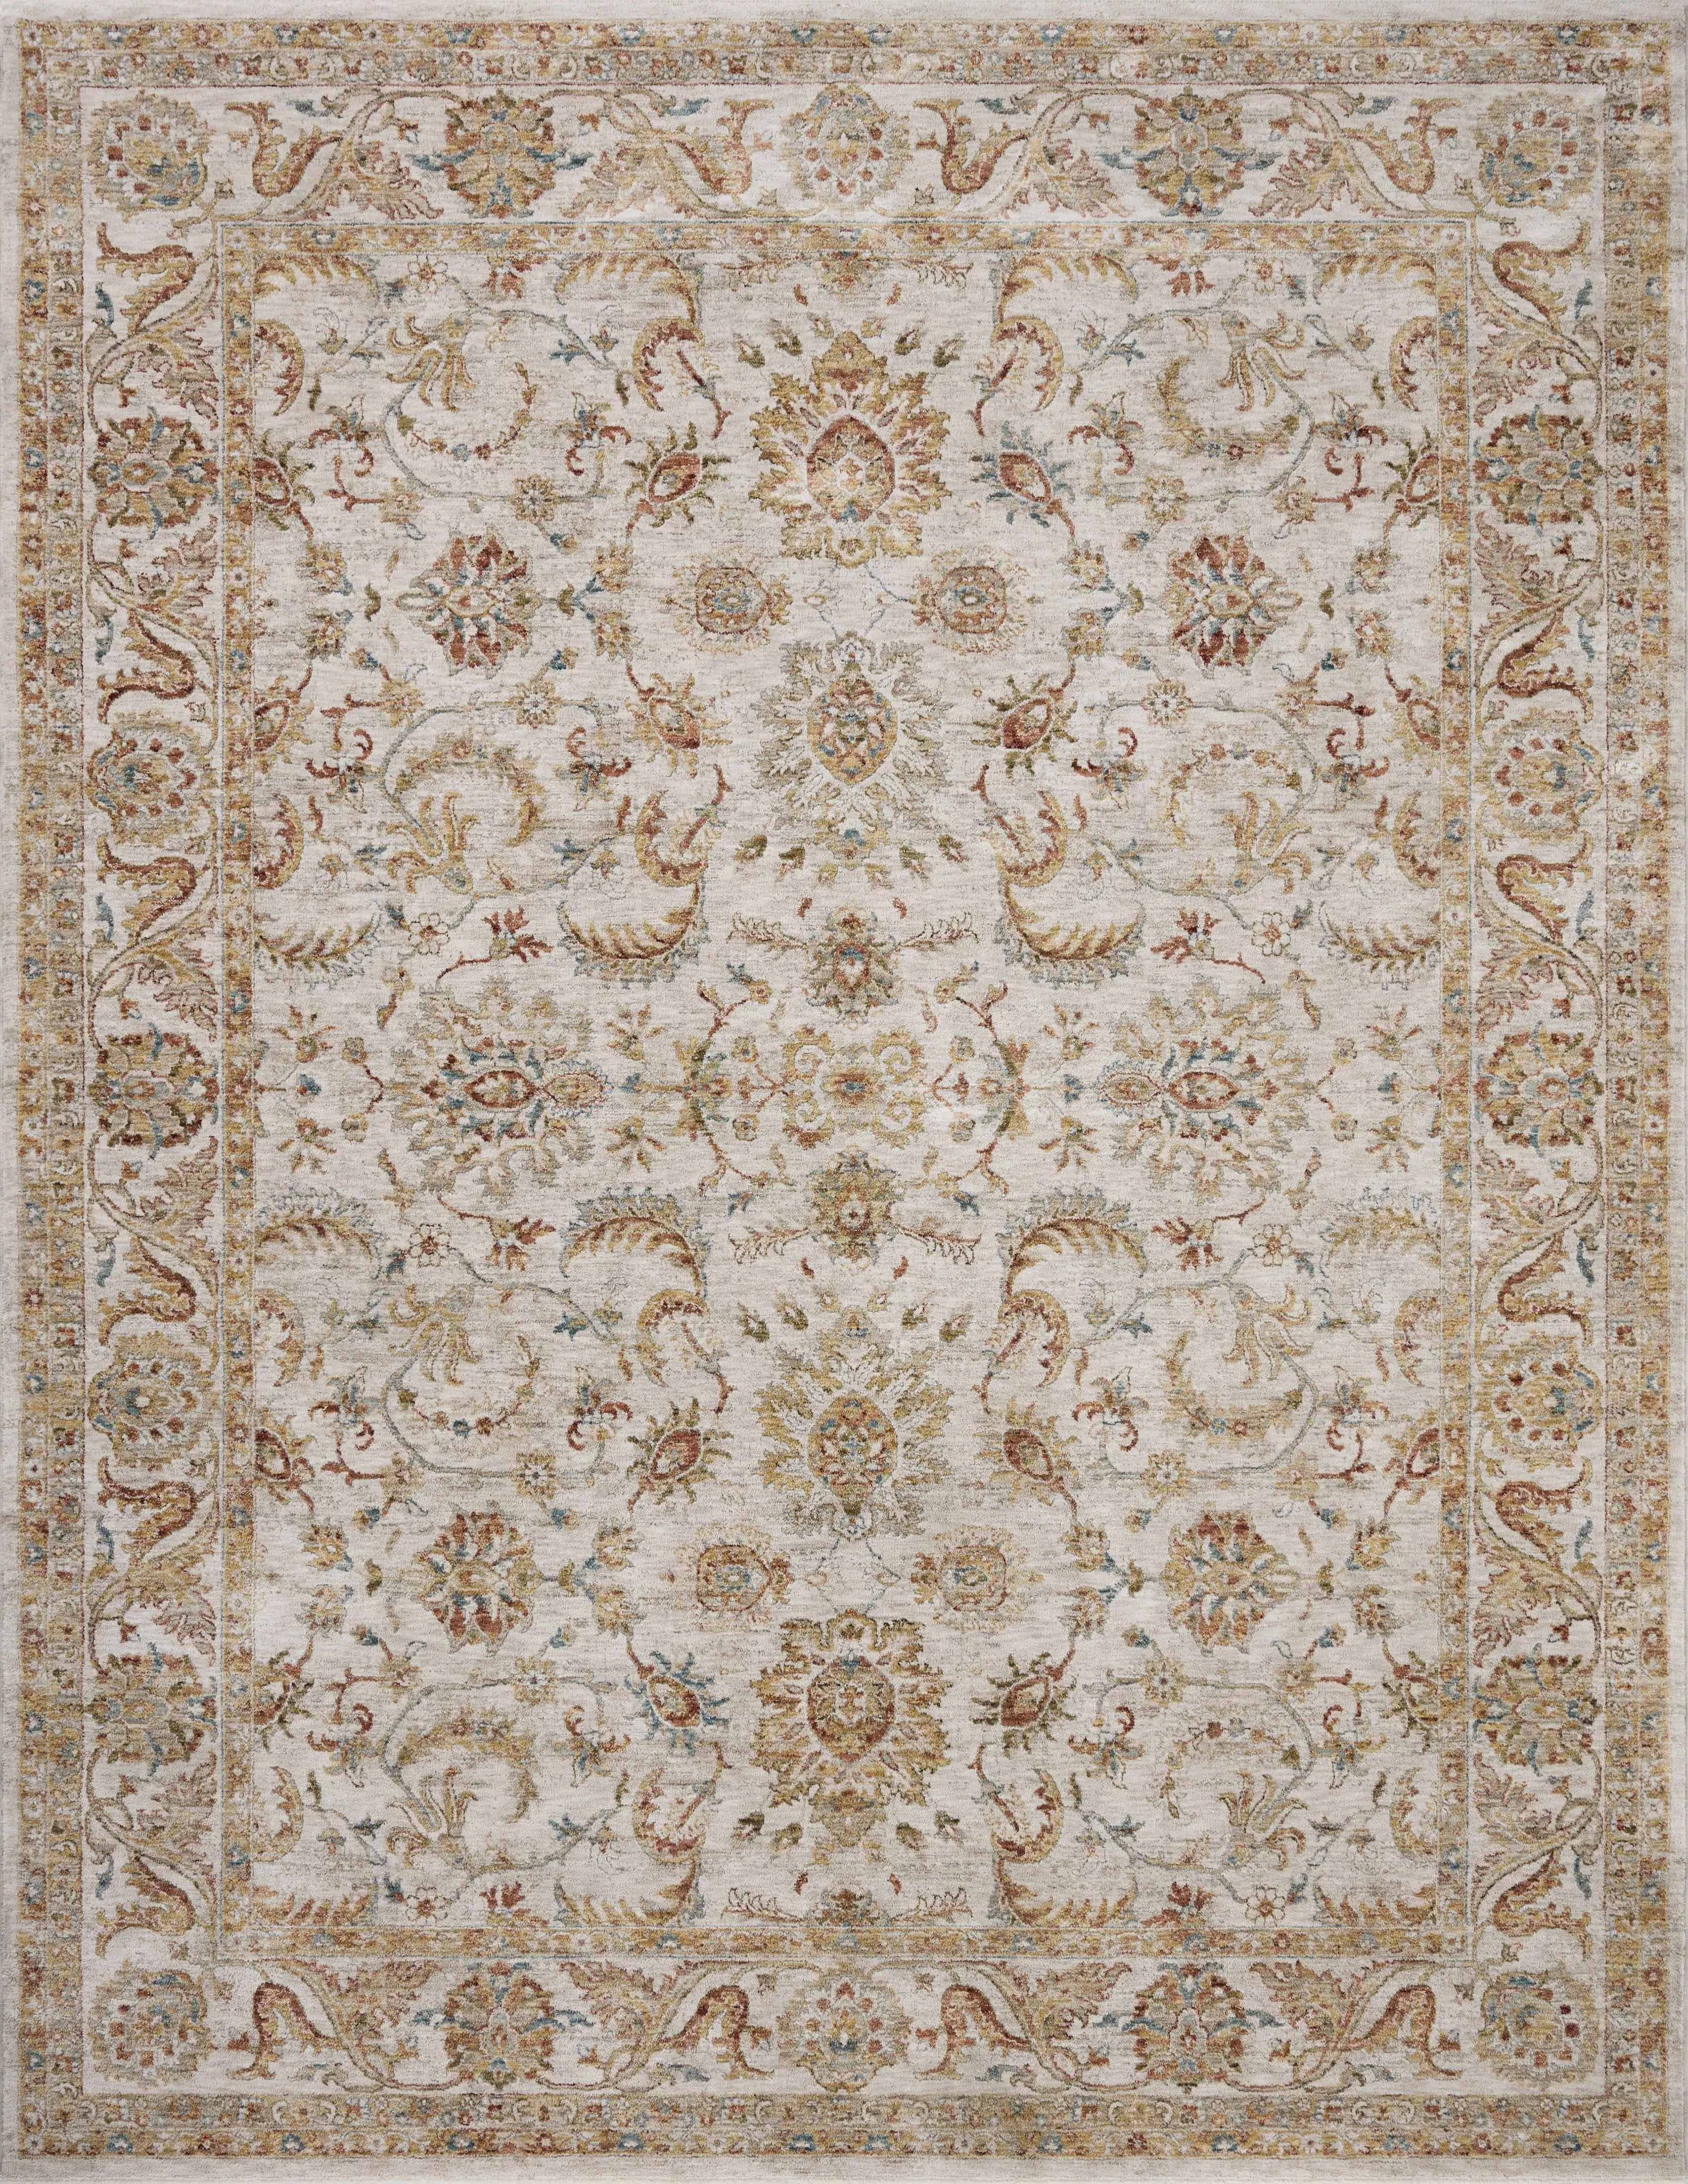 Power-loomed in Turkey of 100% polyester pile, the Gaia Natural / Sunset Rug displays a classic color palette and a mix of abstract and traditional-inspired motifs. With a variation of warm and cool tones, mix of modern and classic designs, Gaia offers an option for all types of styles Amethyst Home provides interior design, new home construction design consulting, vintage area rugs, and lighting in the Portland metro area.